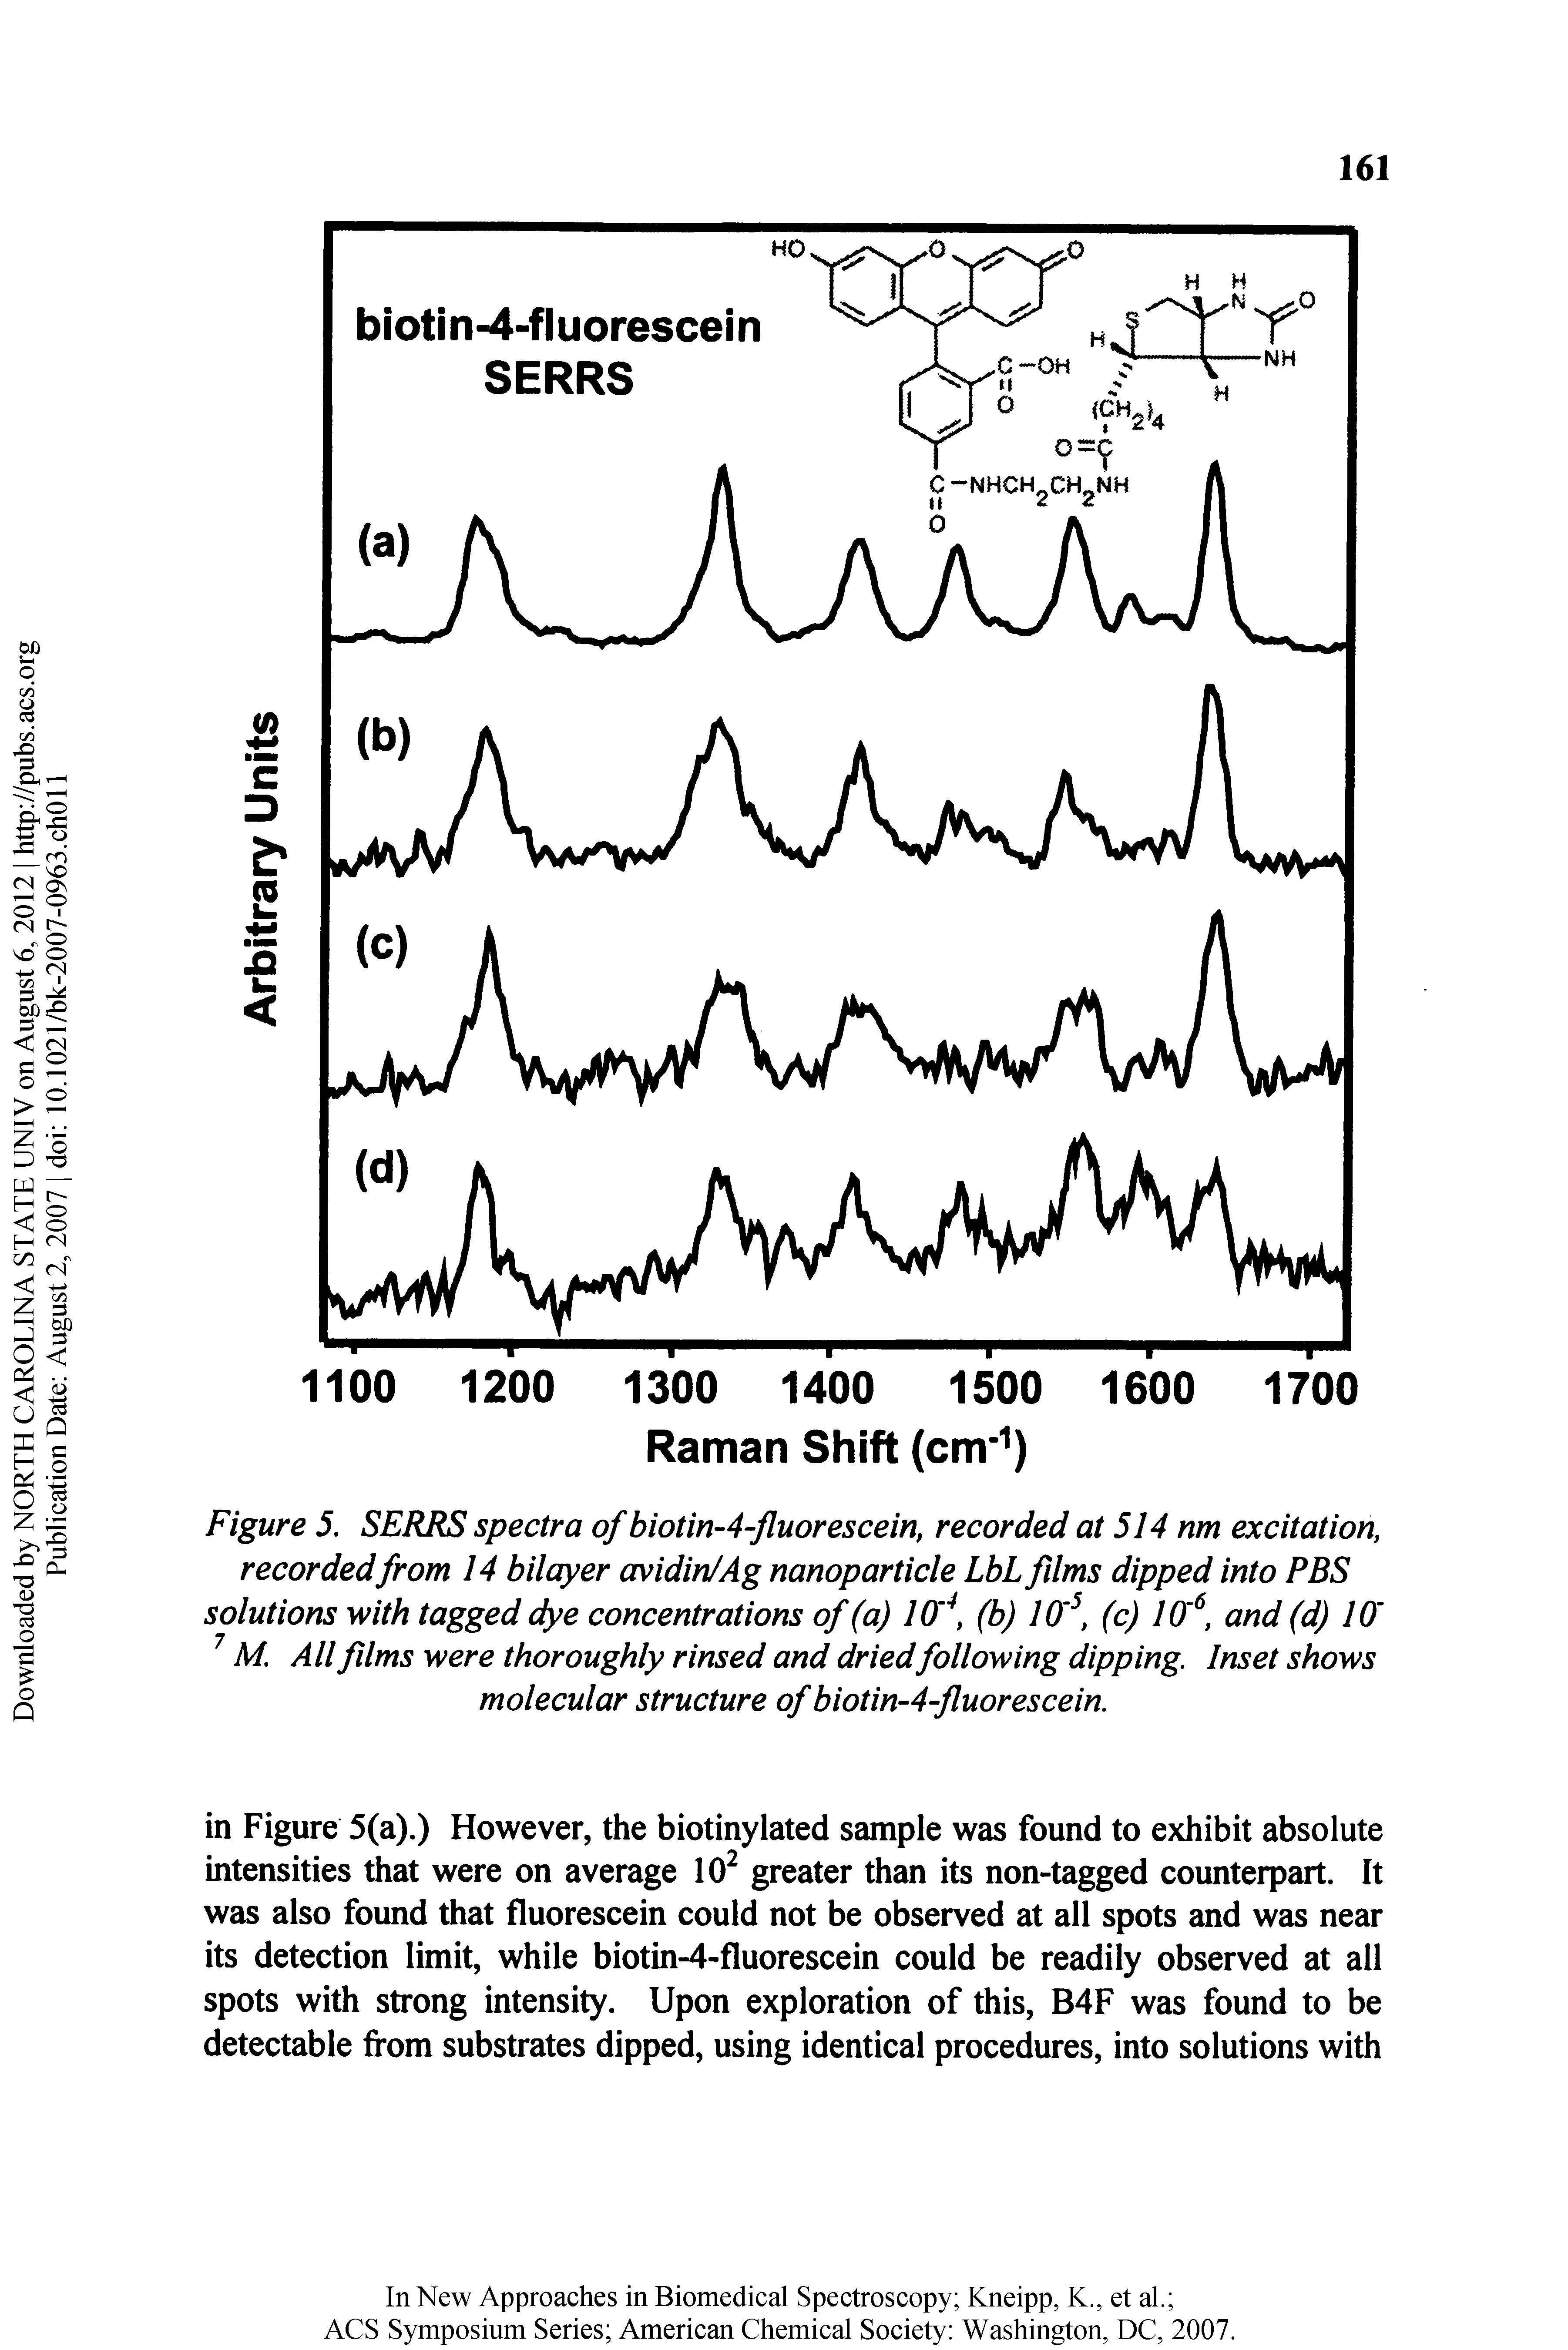 Figure 5. SERRS spectra ofbiotin-4-fluorescein, recorded at 514 nm excitation, recordedfrom 14 bilayer avidin/Ag nanoparticle LbL films dipped into PBS solutions with tagged dye concentrations of (a) 10 (b) 10 (c) 10, and (d) 10 M. All films were thoroughly rinsed and driedfollowing dipping. Inset shows molecular structure of biotin-4-fluorescein.